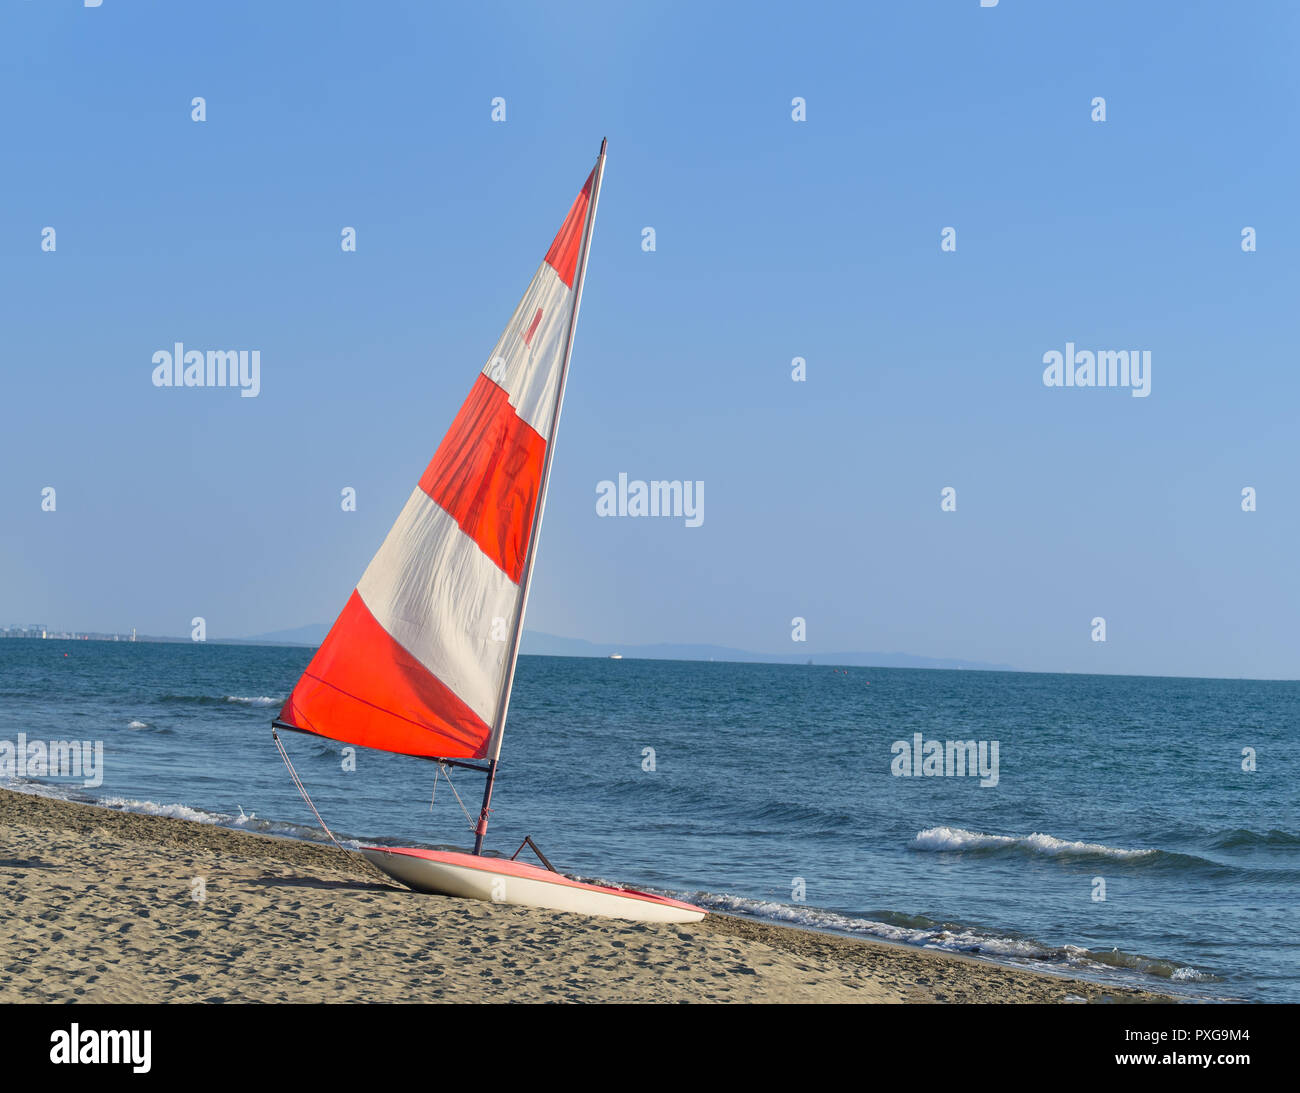 small sail boat with  with red and white  colorful sail on the beach ready for the next ride off the coast Stock Photo